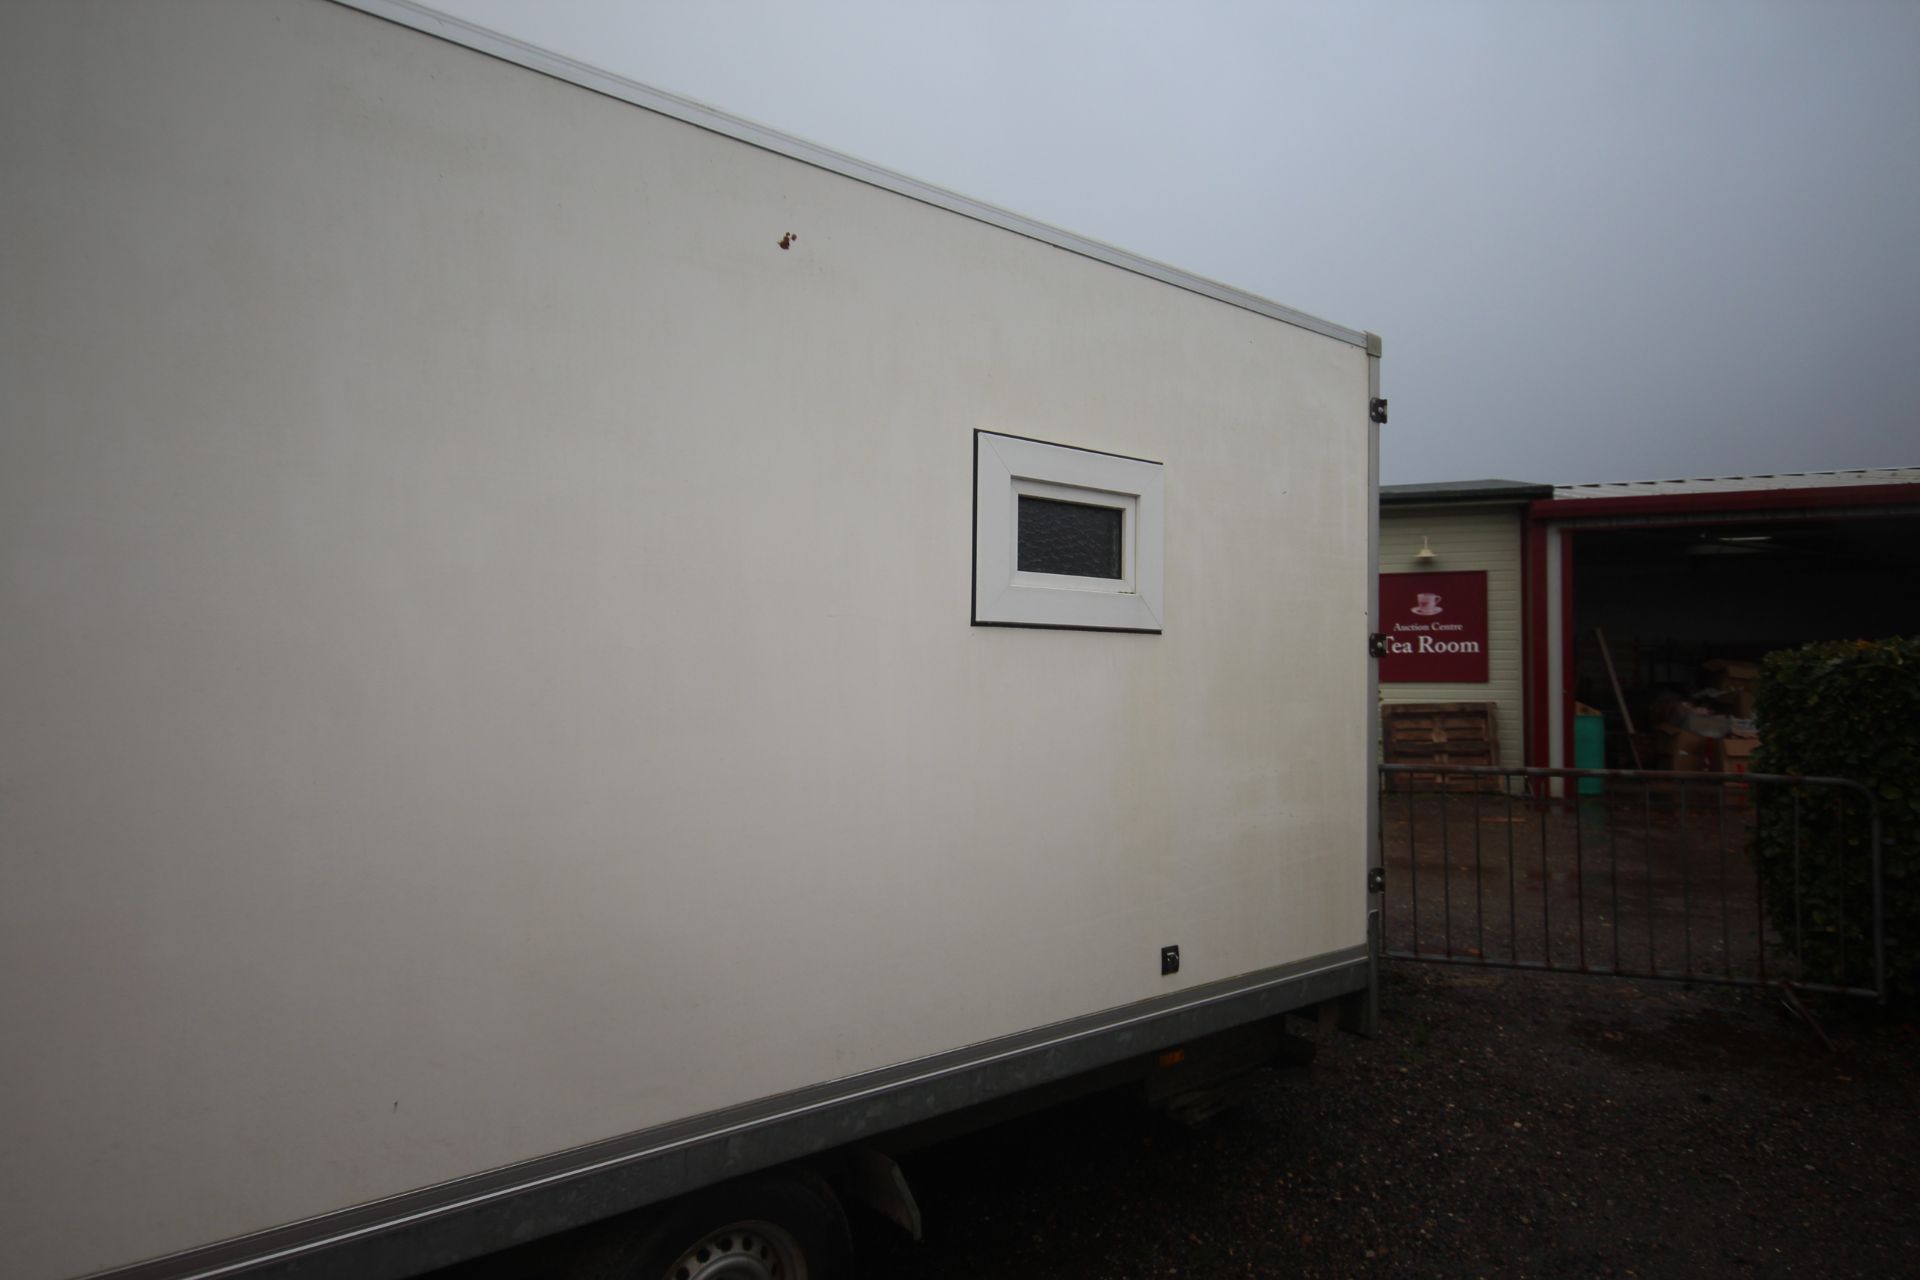 Henra 17ft 5in x 7ft 6in twin axle exhibition/ box trailer. With barn doors, side opening and - Image 7 of 16